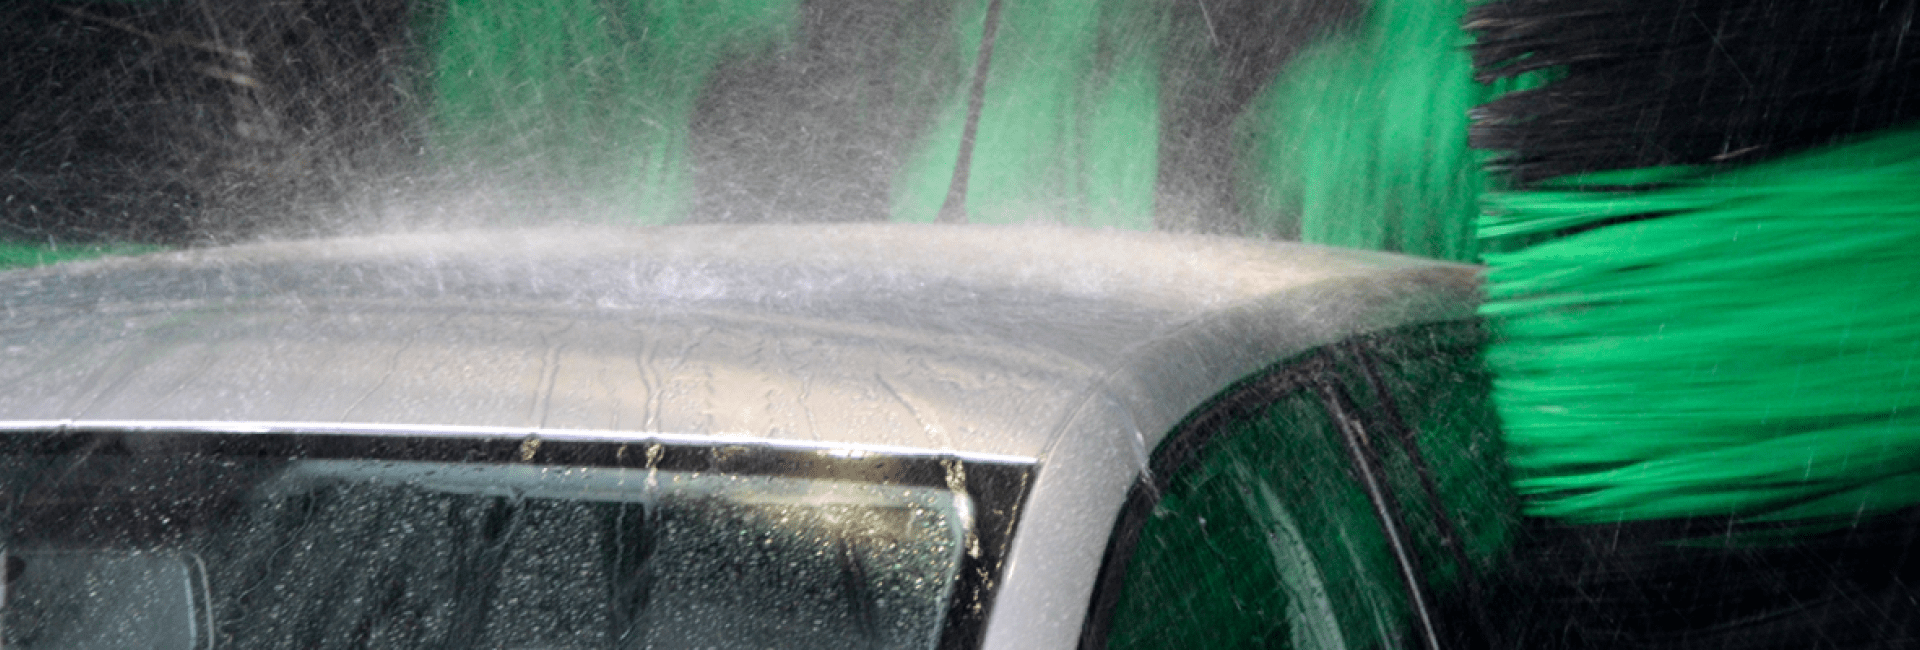 The top of a car where water comes down as heavy rain as it is washed by the high-pressure nozzles of a roll over carwash